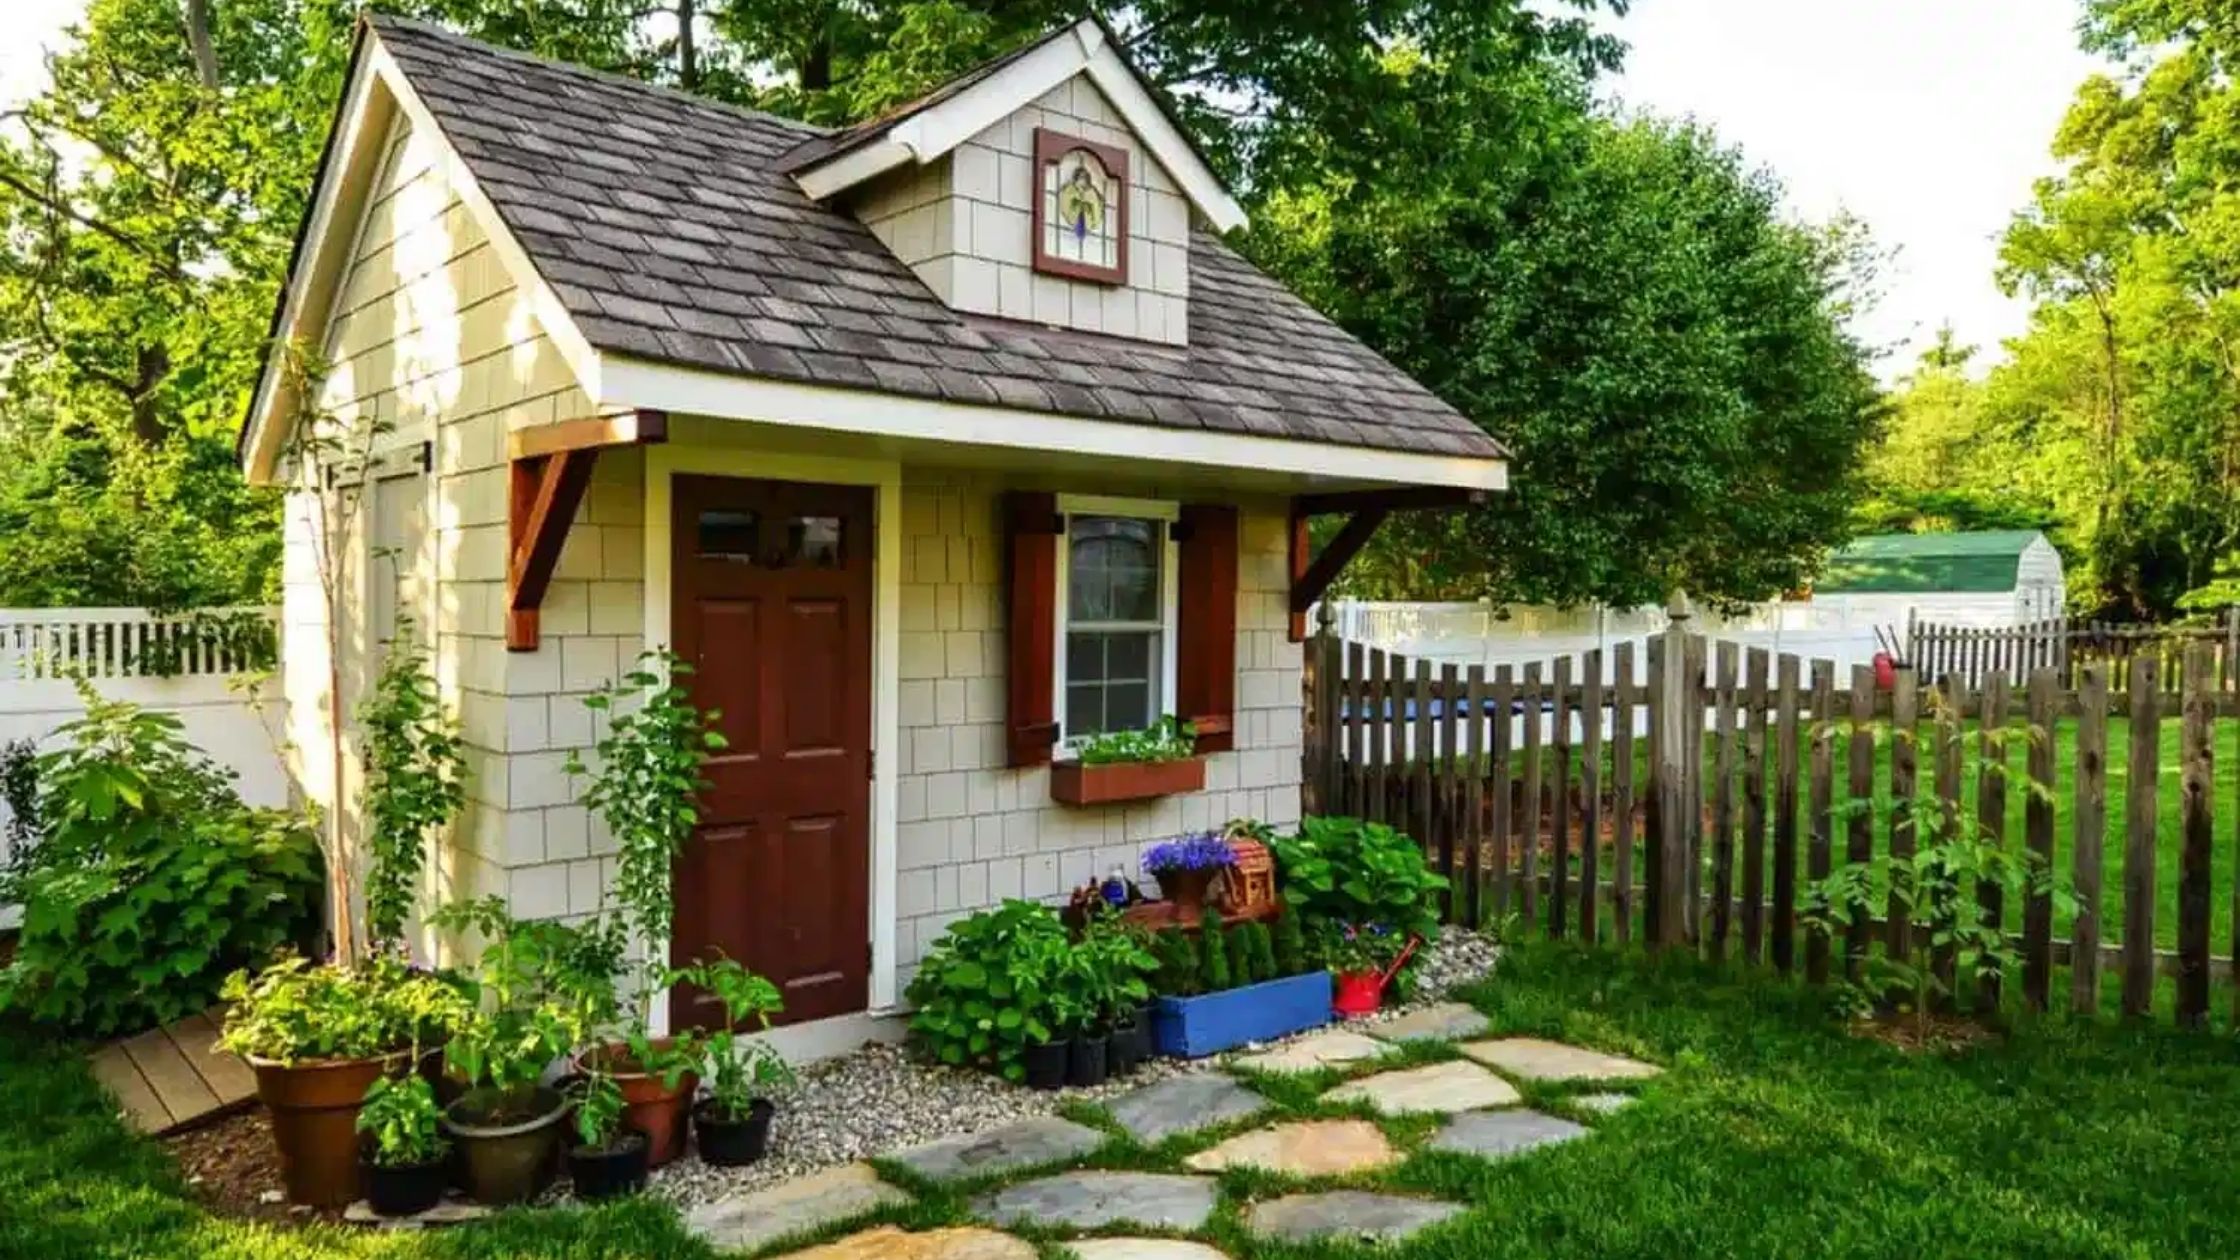 Garden shed ideas to transform you old garden shed